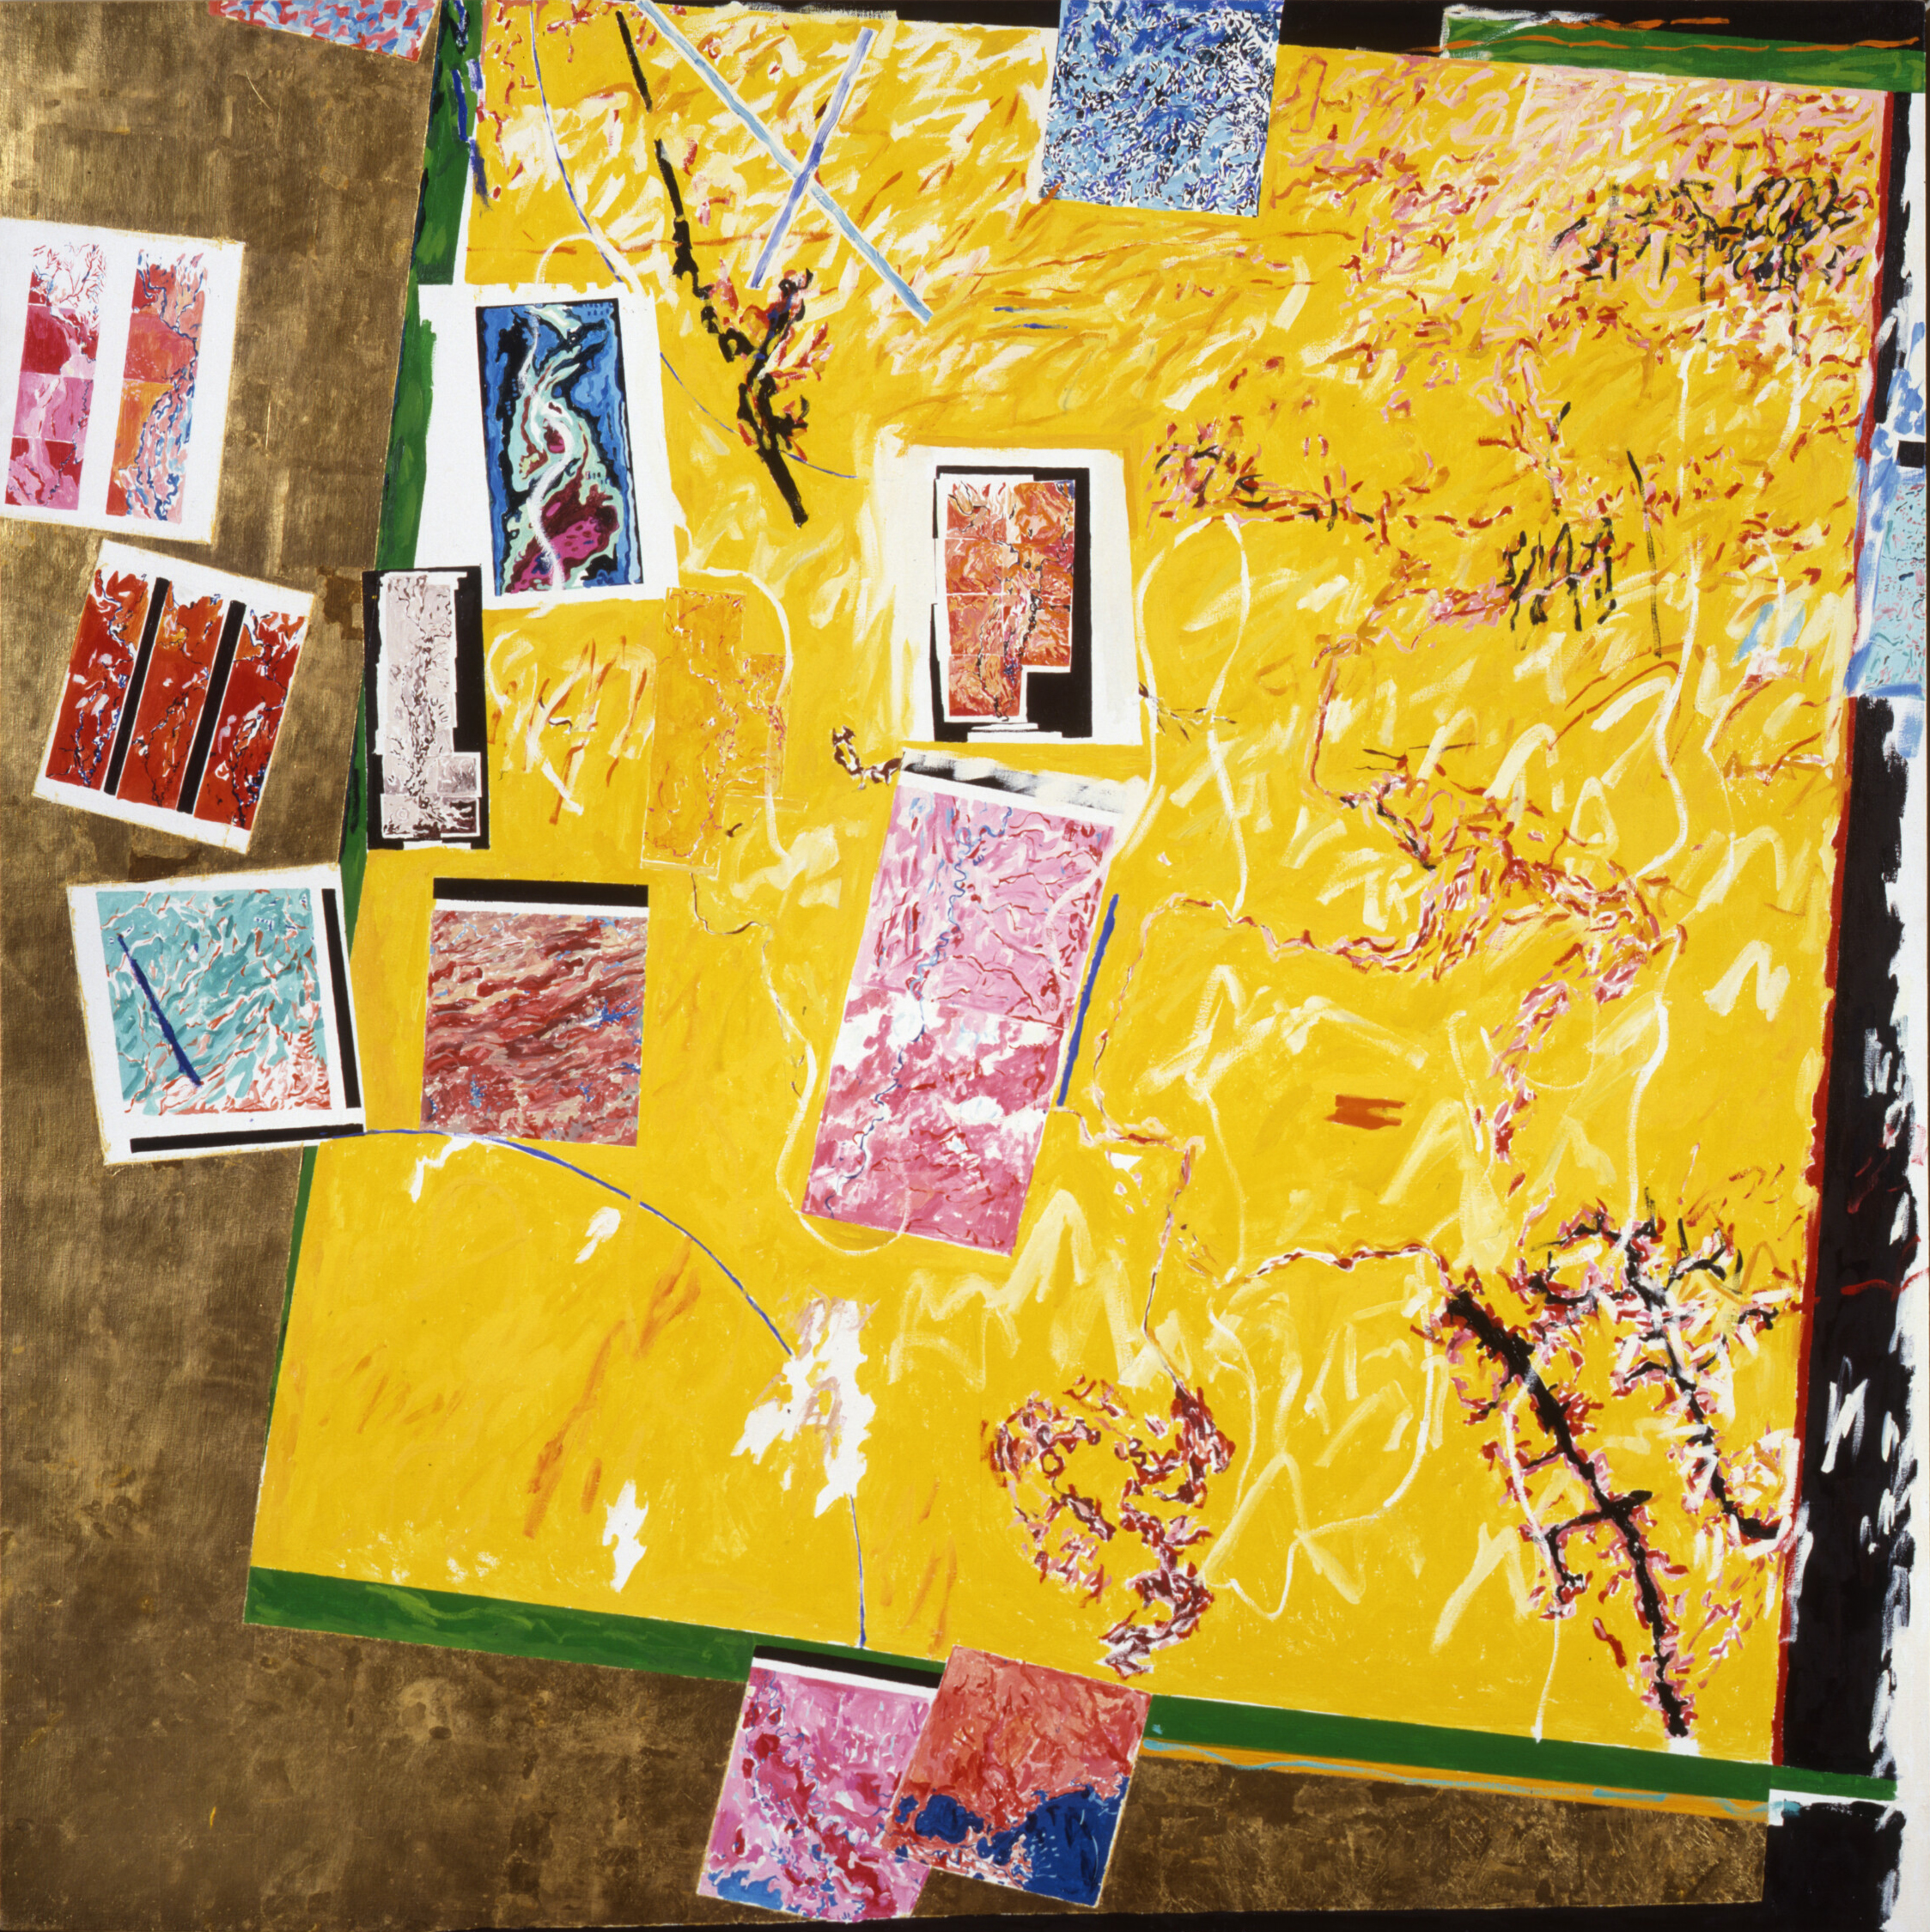 A painting that resembles a collage made up of one large abstract painting with a yellow background and pink, white, black gestural marks. On top of the painting are several smaller pieces that resemble printed versions of artwork in a similar style. Behind the large painting is a gold-leaf background.